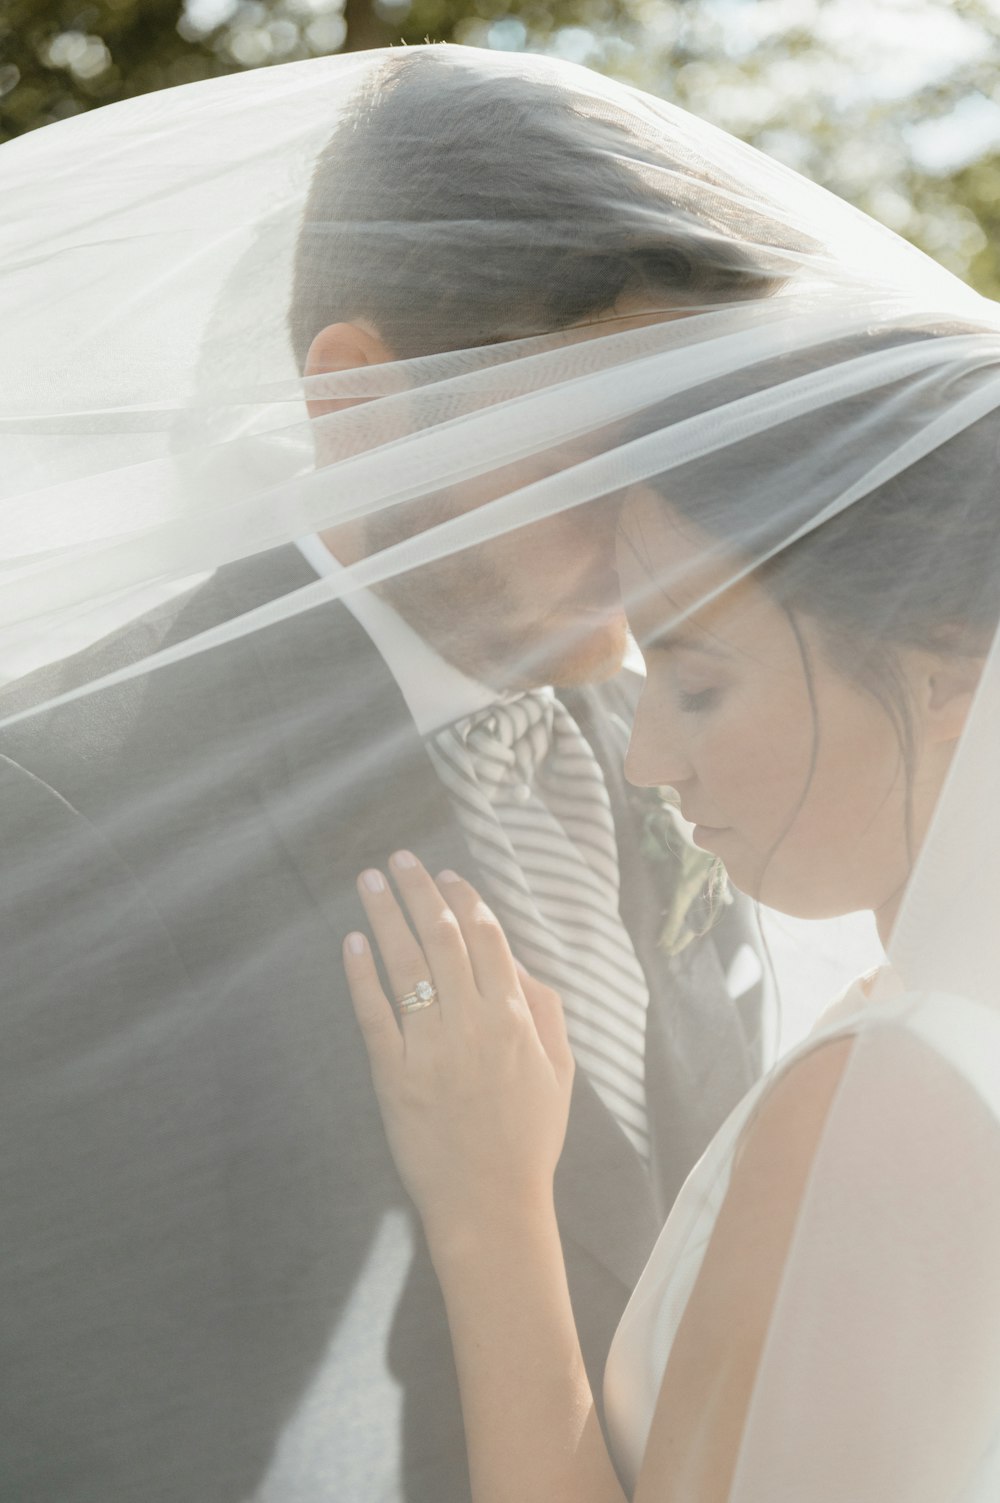 woman in white dress shirt covering her face with white veil